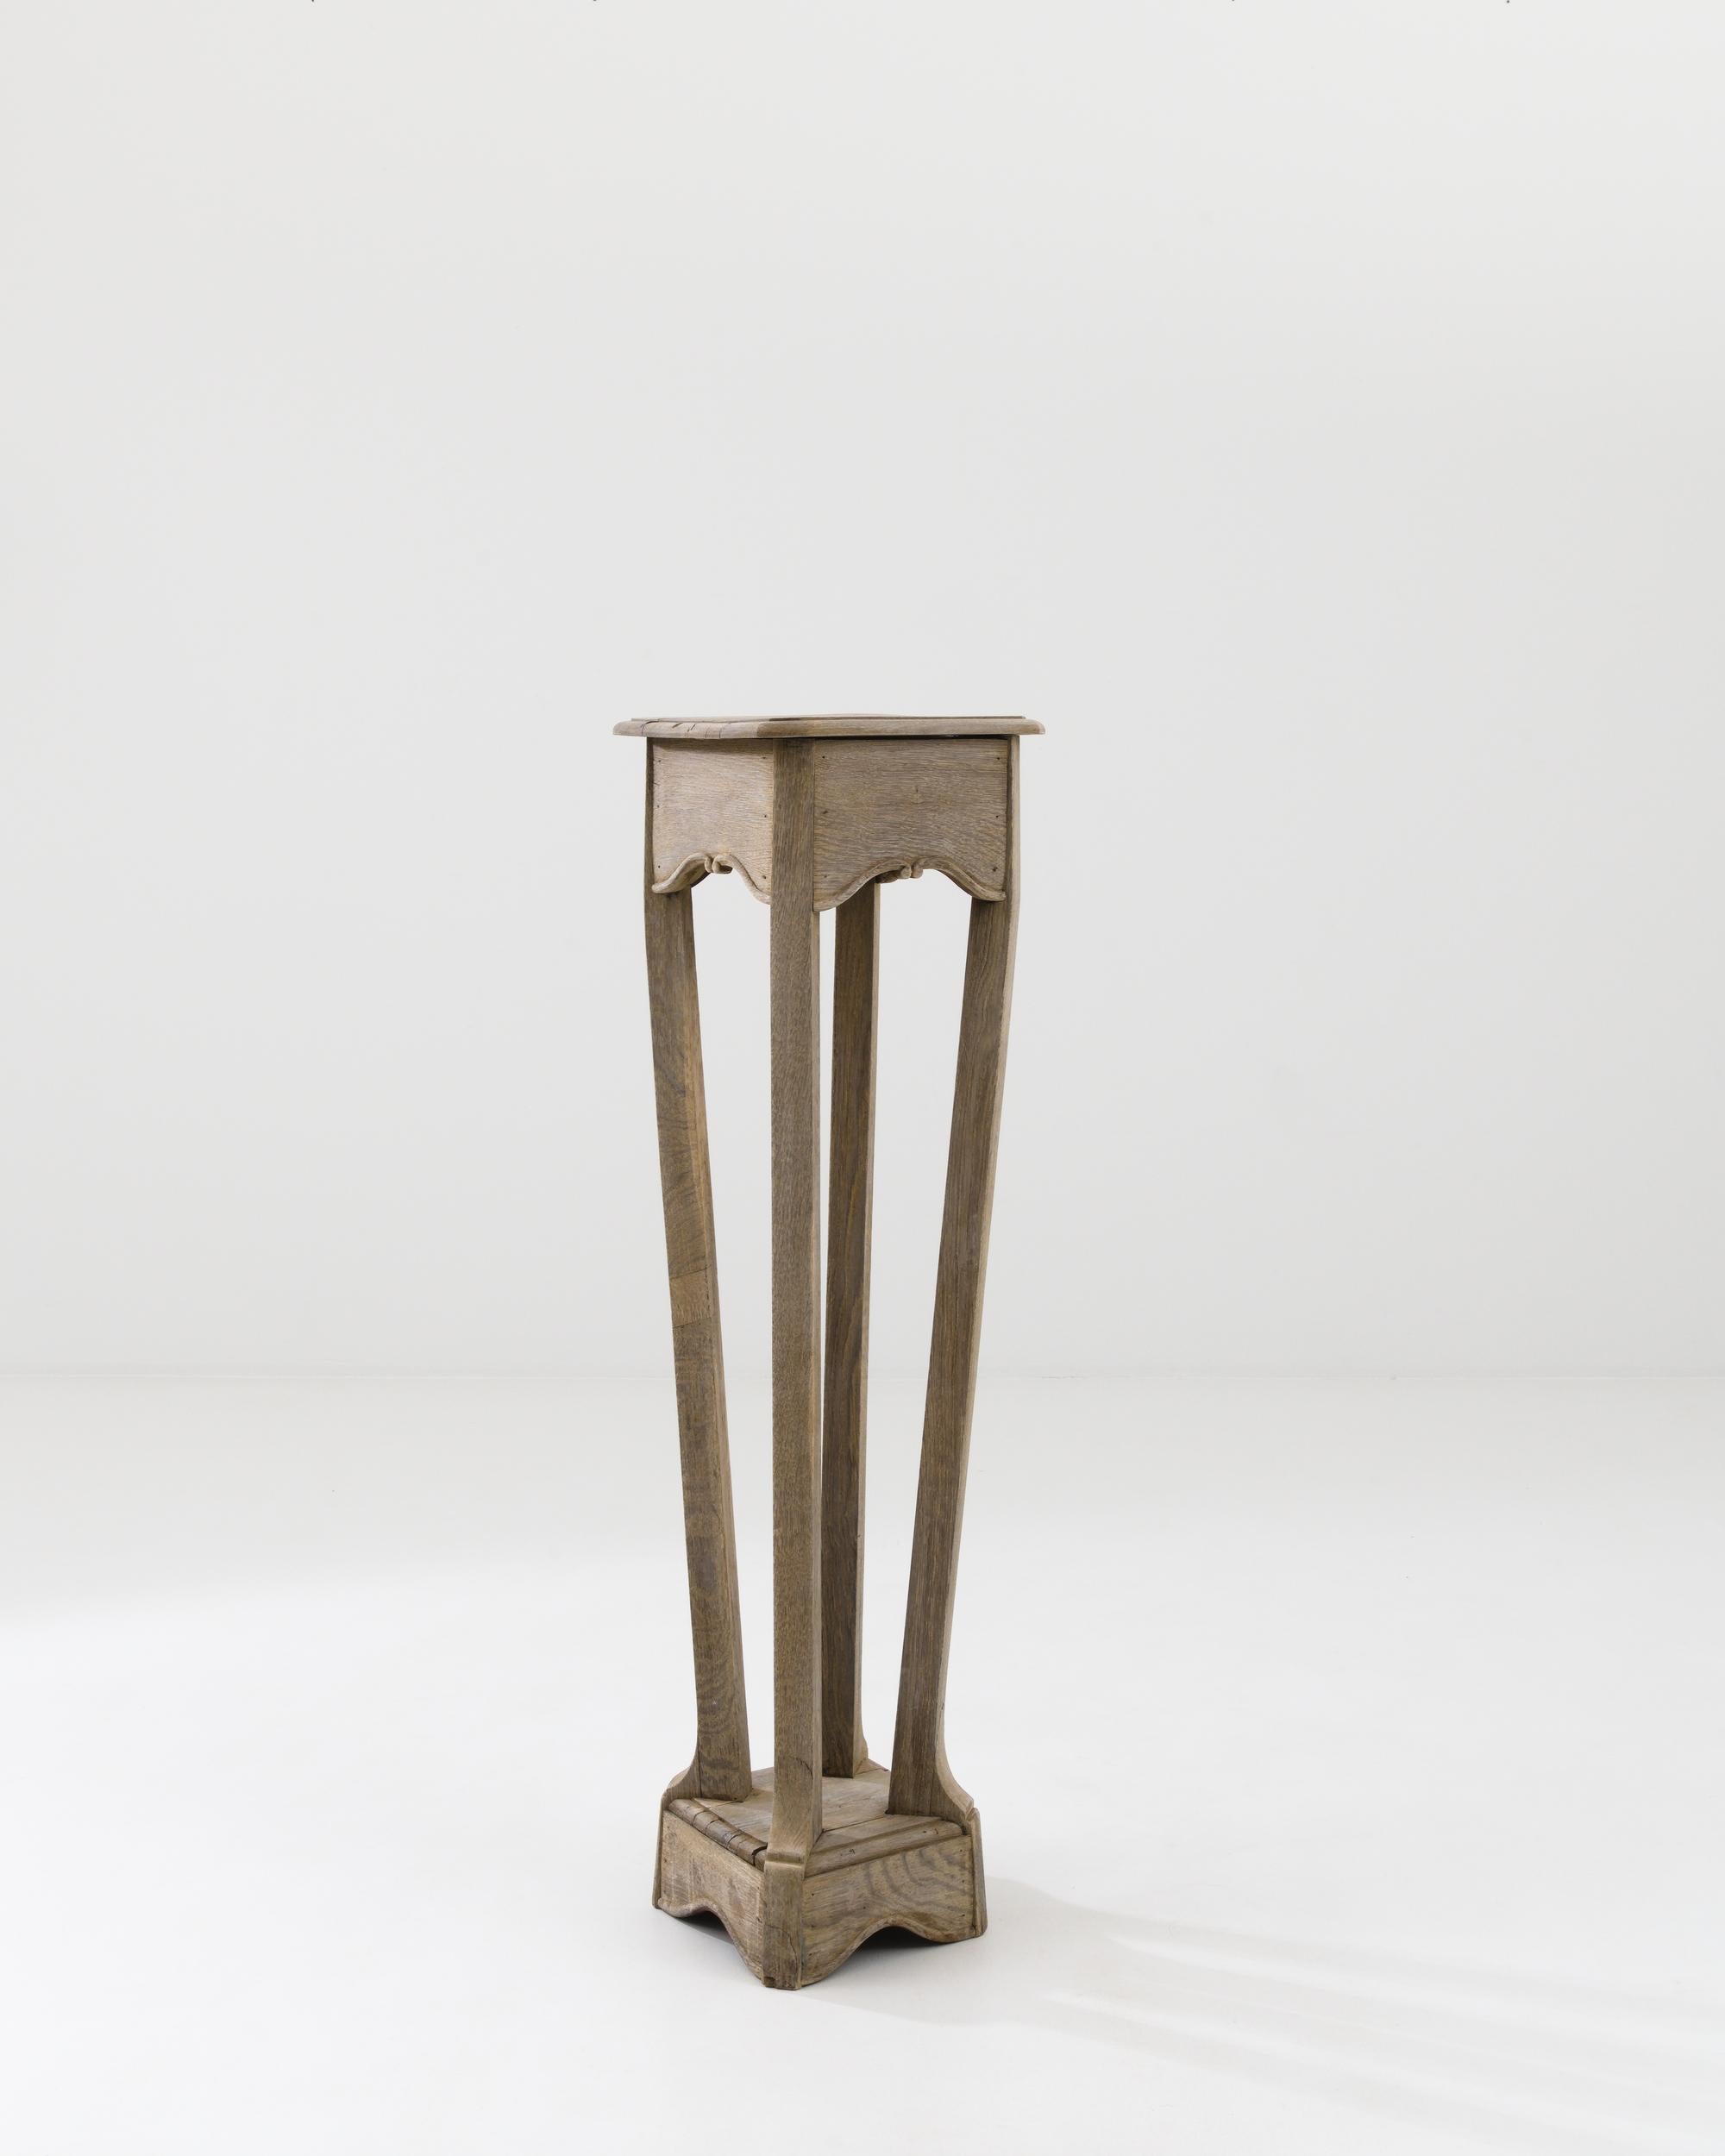 A wooden pedestal created in 20th century France. Slender, swooping legs gracefully descend downwards from this pedestal’s top, reminiscent of the shape of a squid propelling itself forward underwater. A delicate bleaching process has been applied